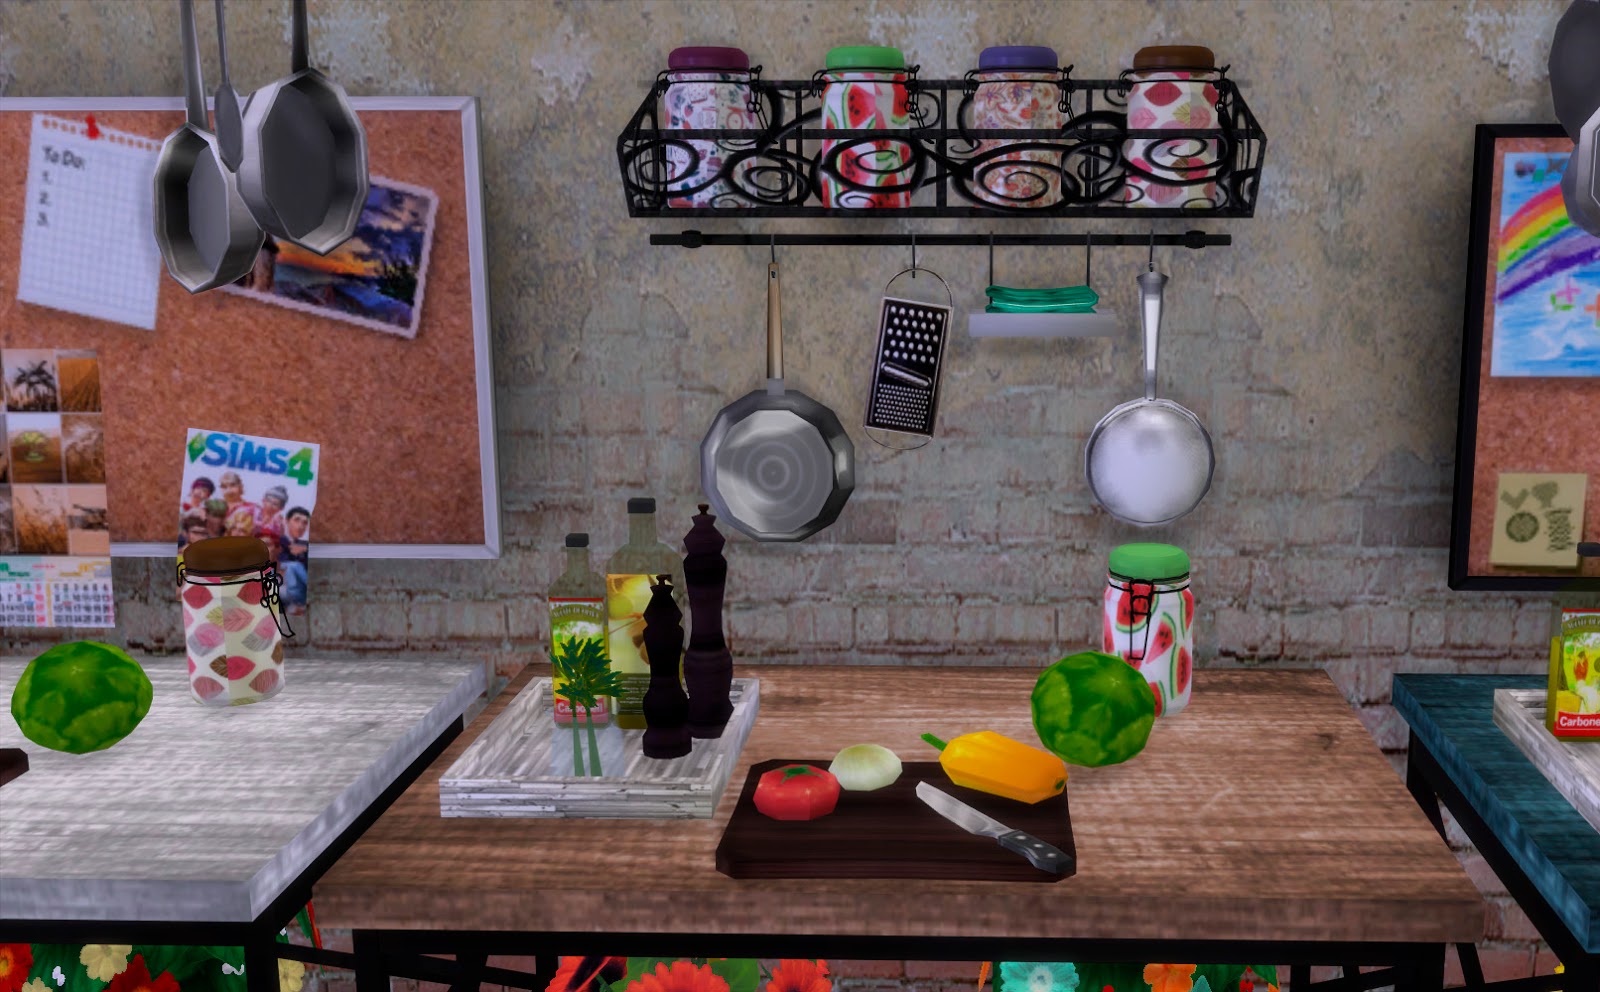 Sims 4 Ccs The Best Urban Chic Kitchen Clutter By Pqsim4